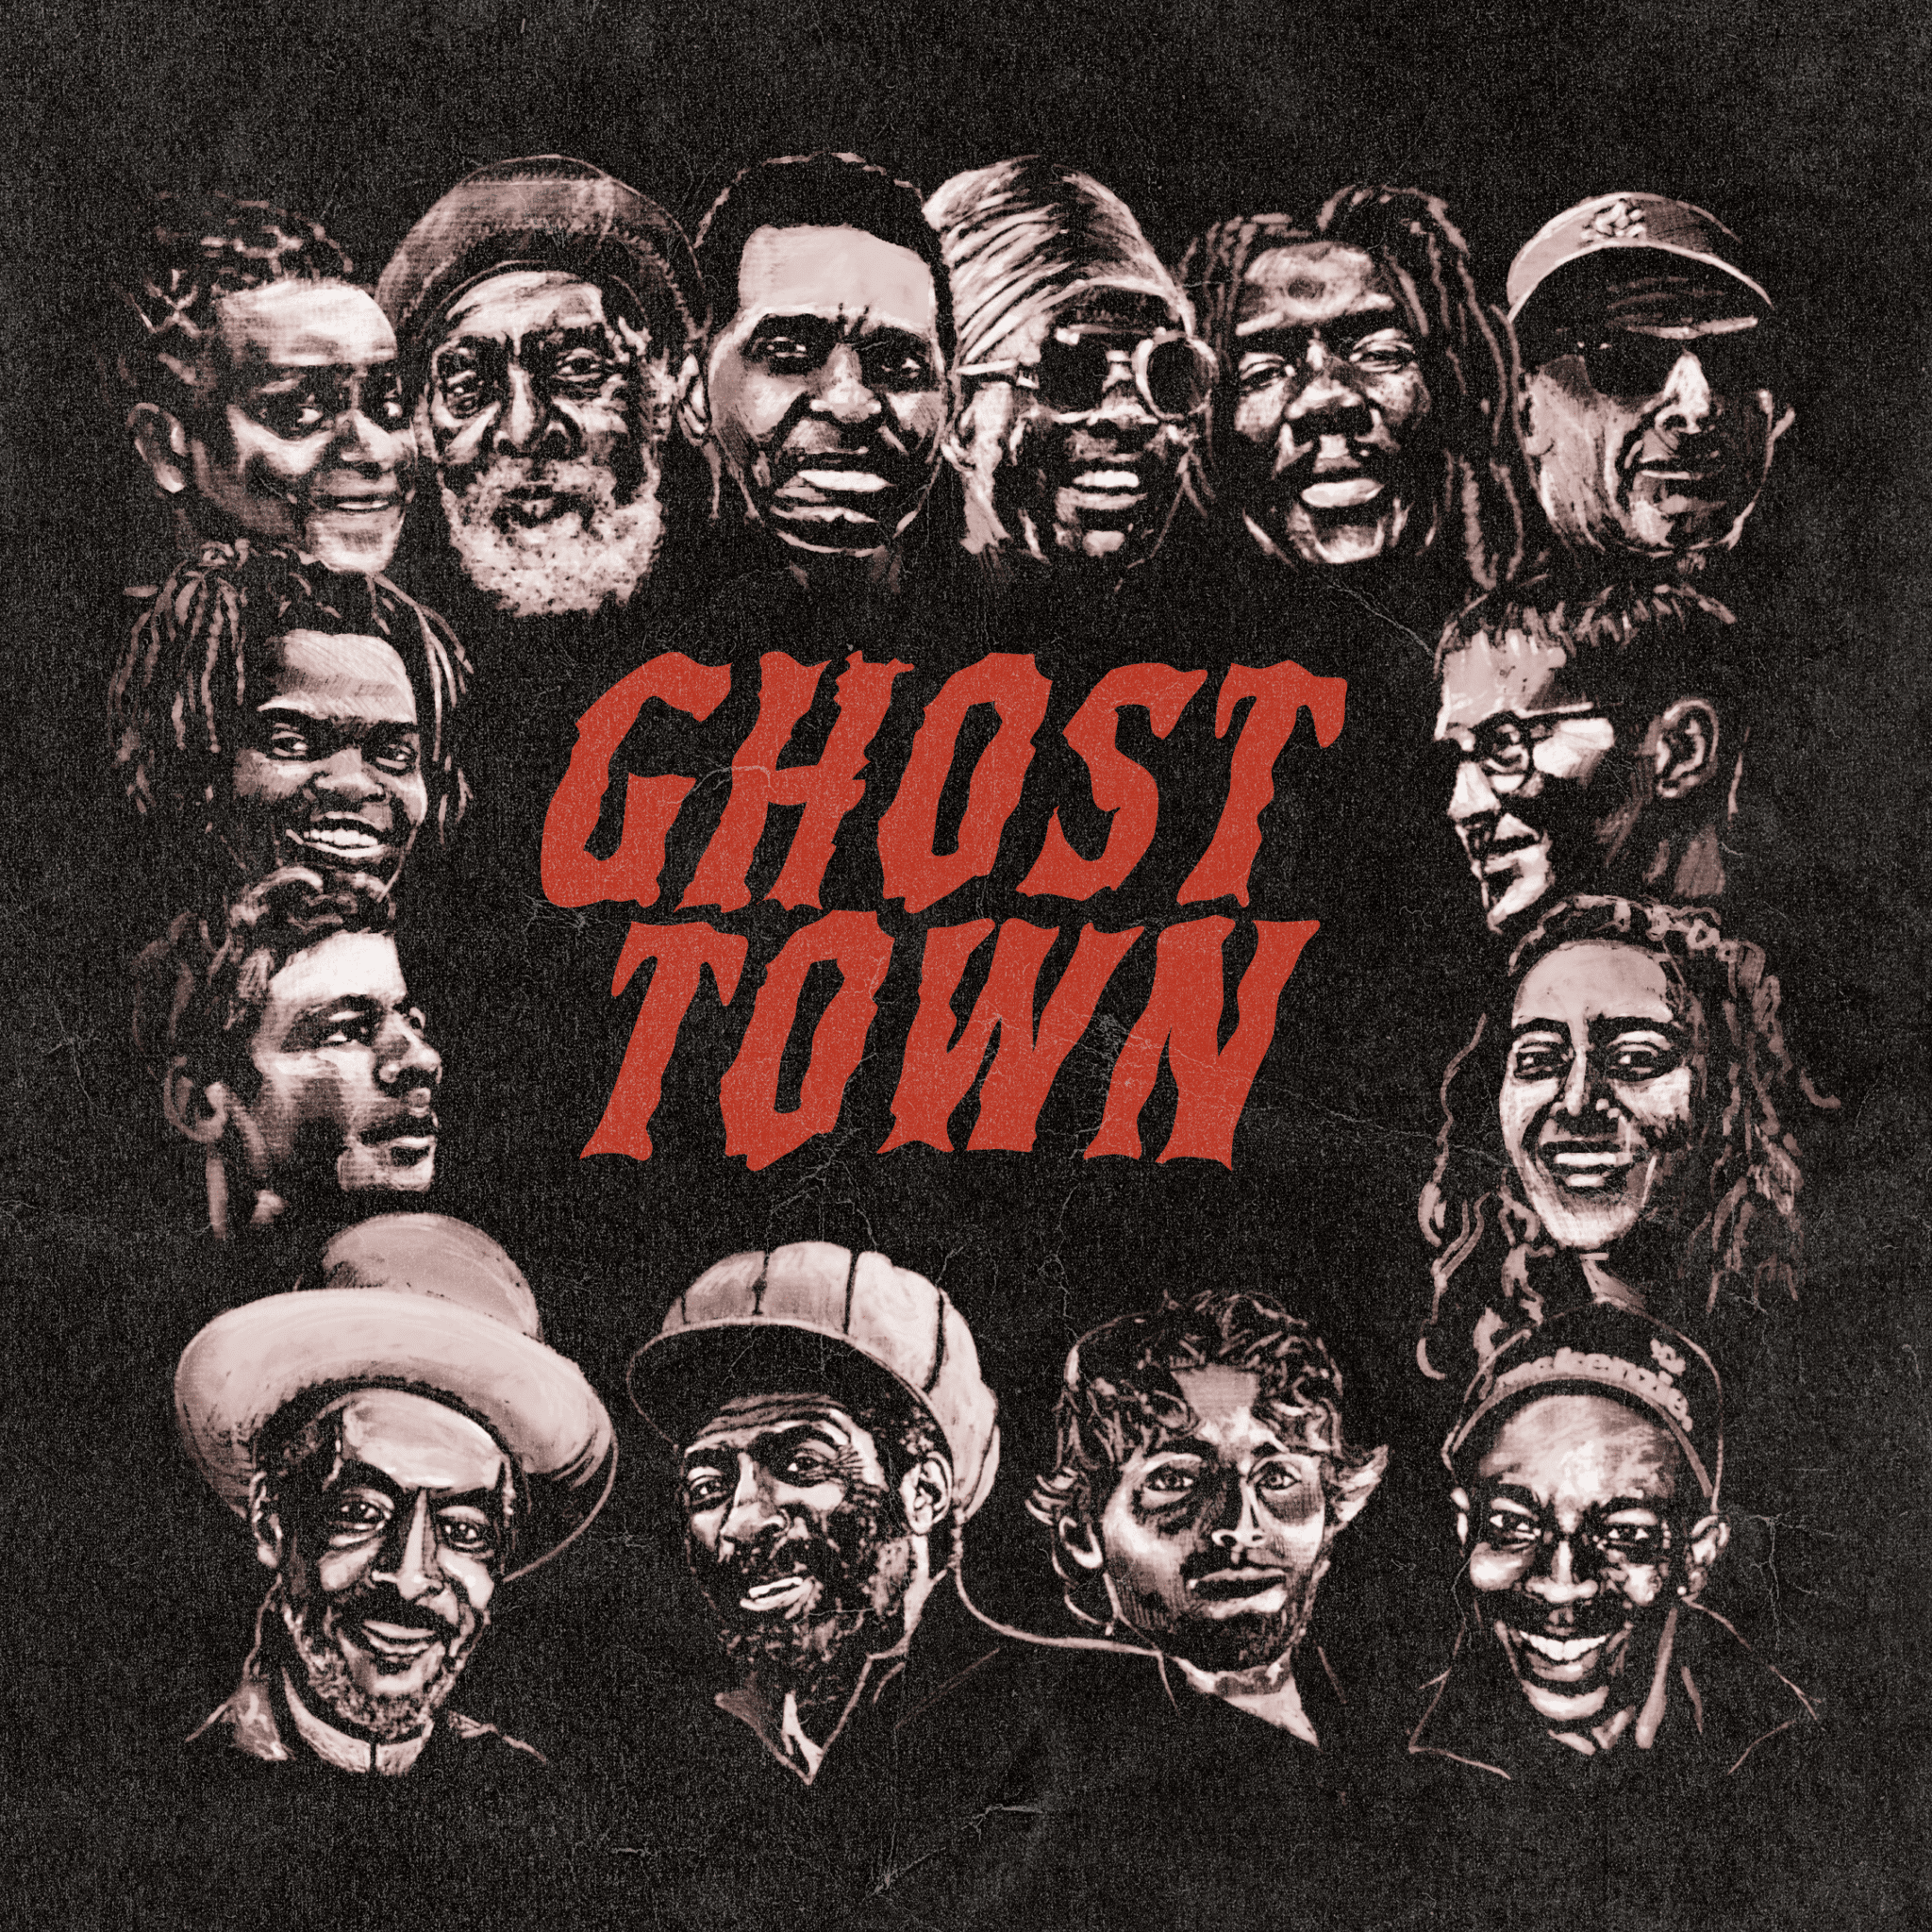 ROOTS: GHOST TOWN – 28TH OCTOBER 2023